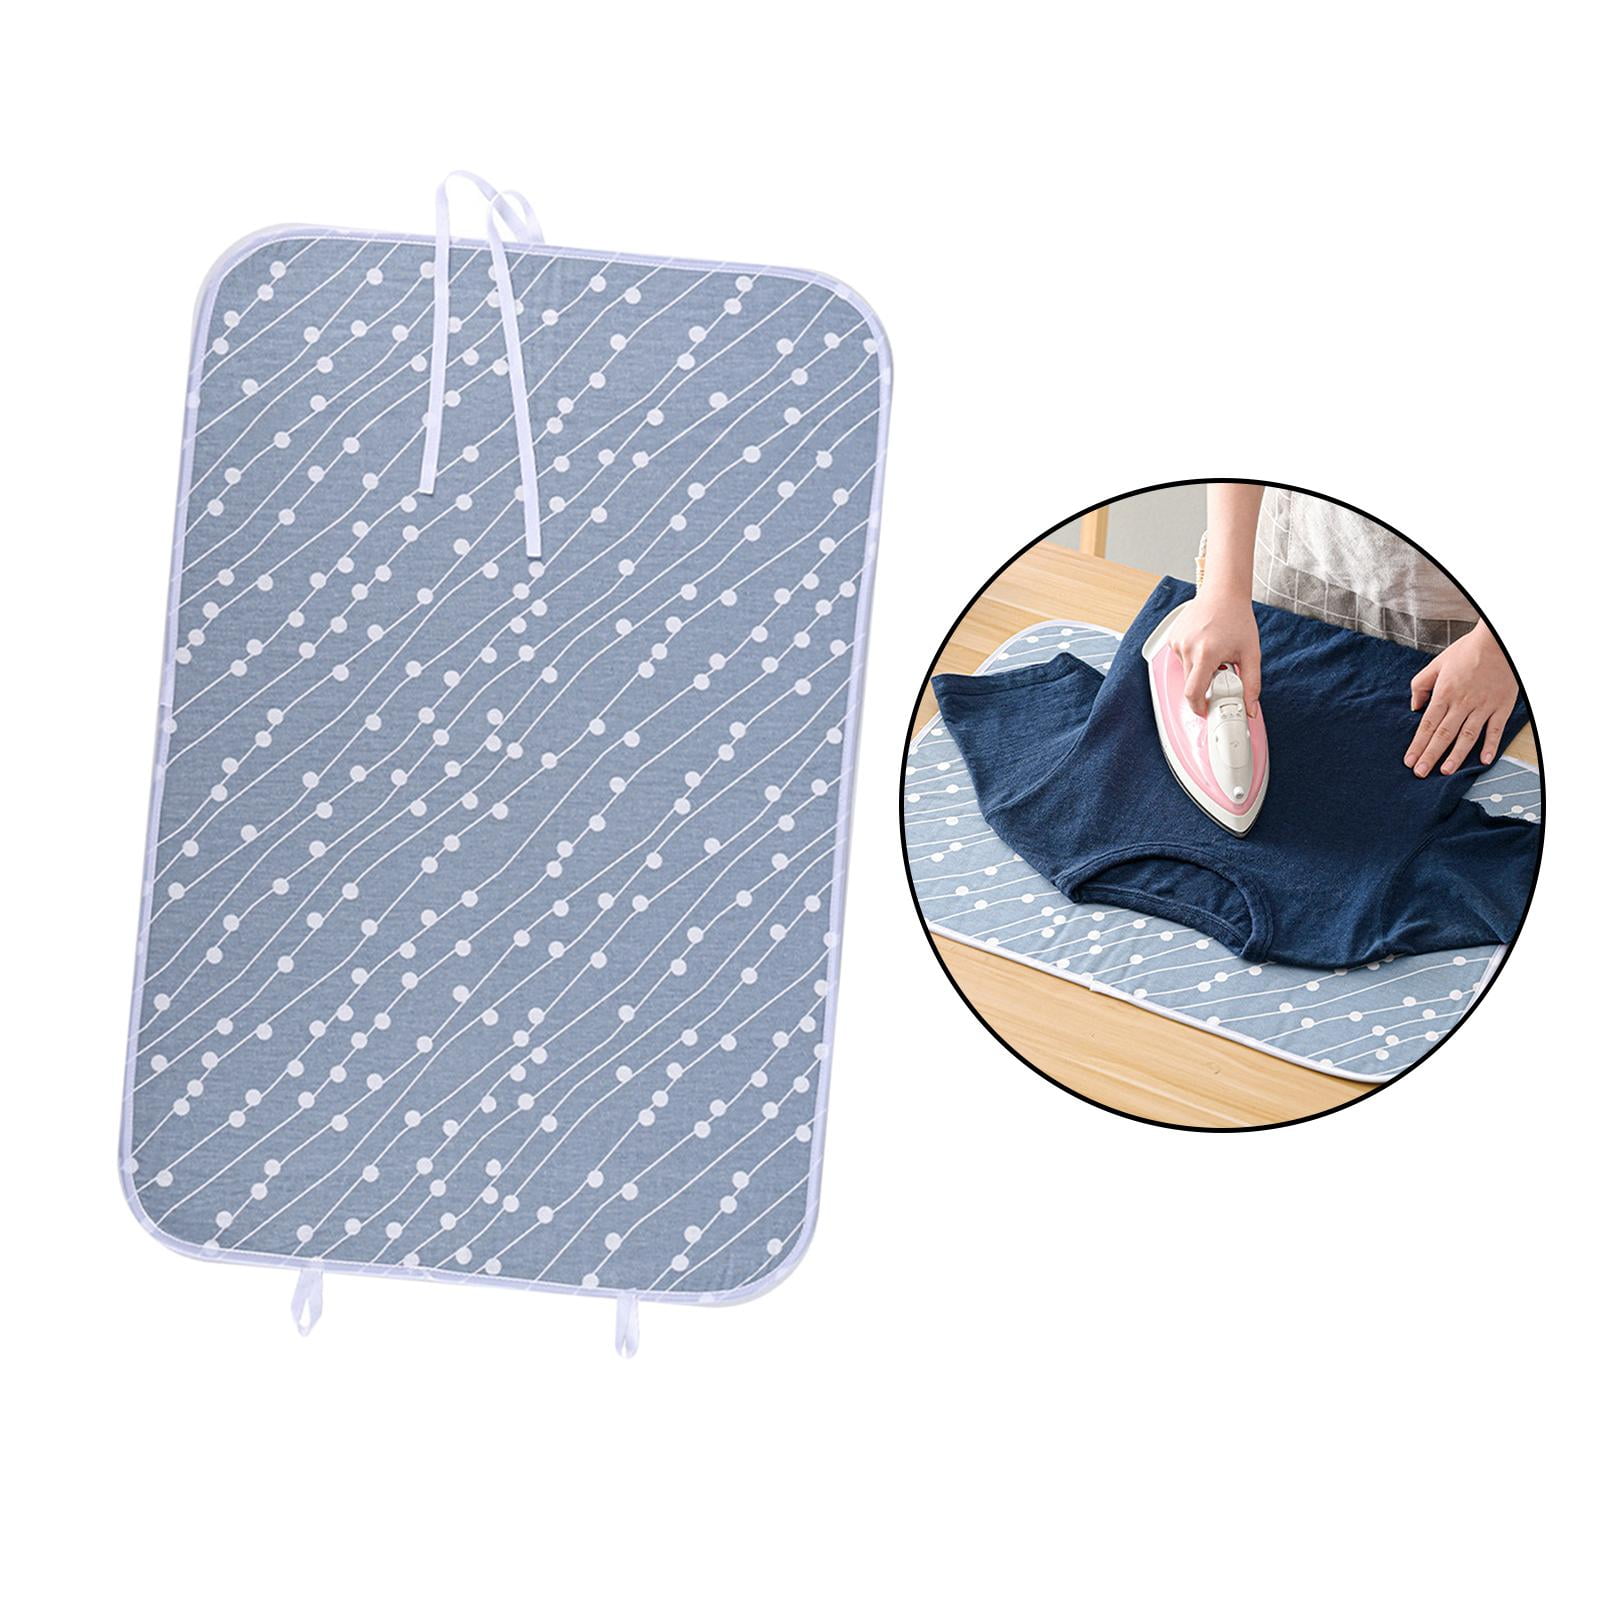 Ironing Cloth, Portable Ironing Mat with Silicone Pad, and Pressing Mesh  Ironing Cloth, Heat Resistant Ironing